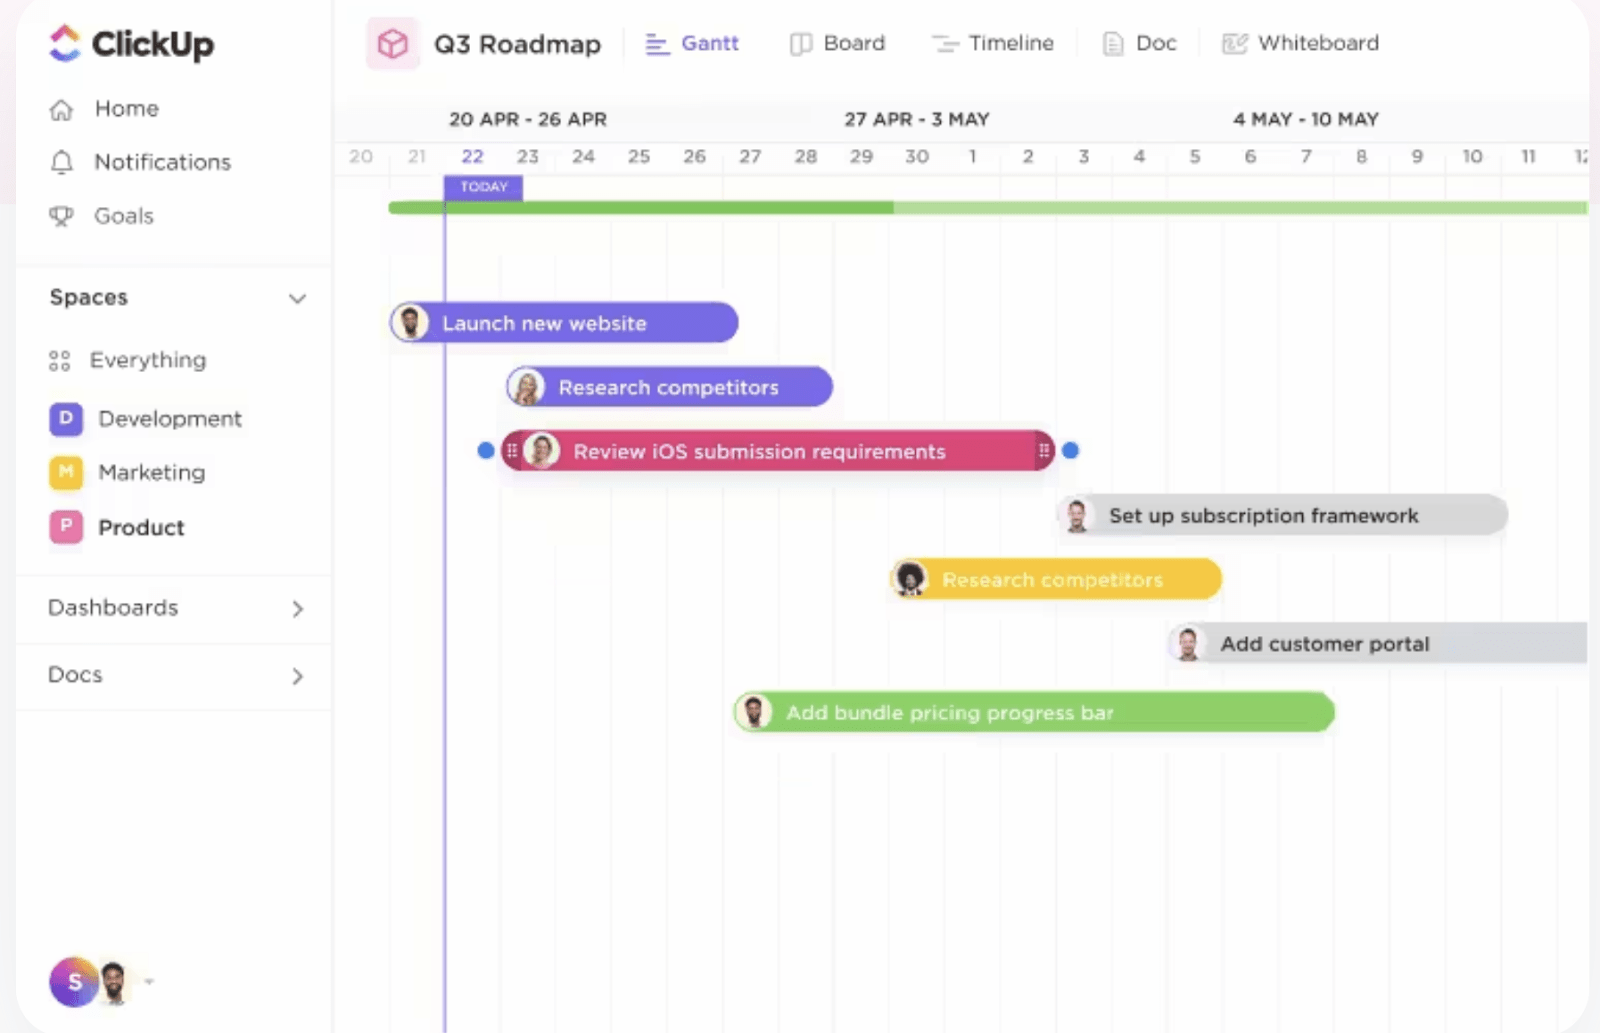 Plan your quarterly roadmaps with ClickUp’s Project Management Template